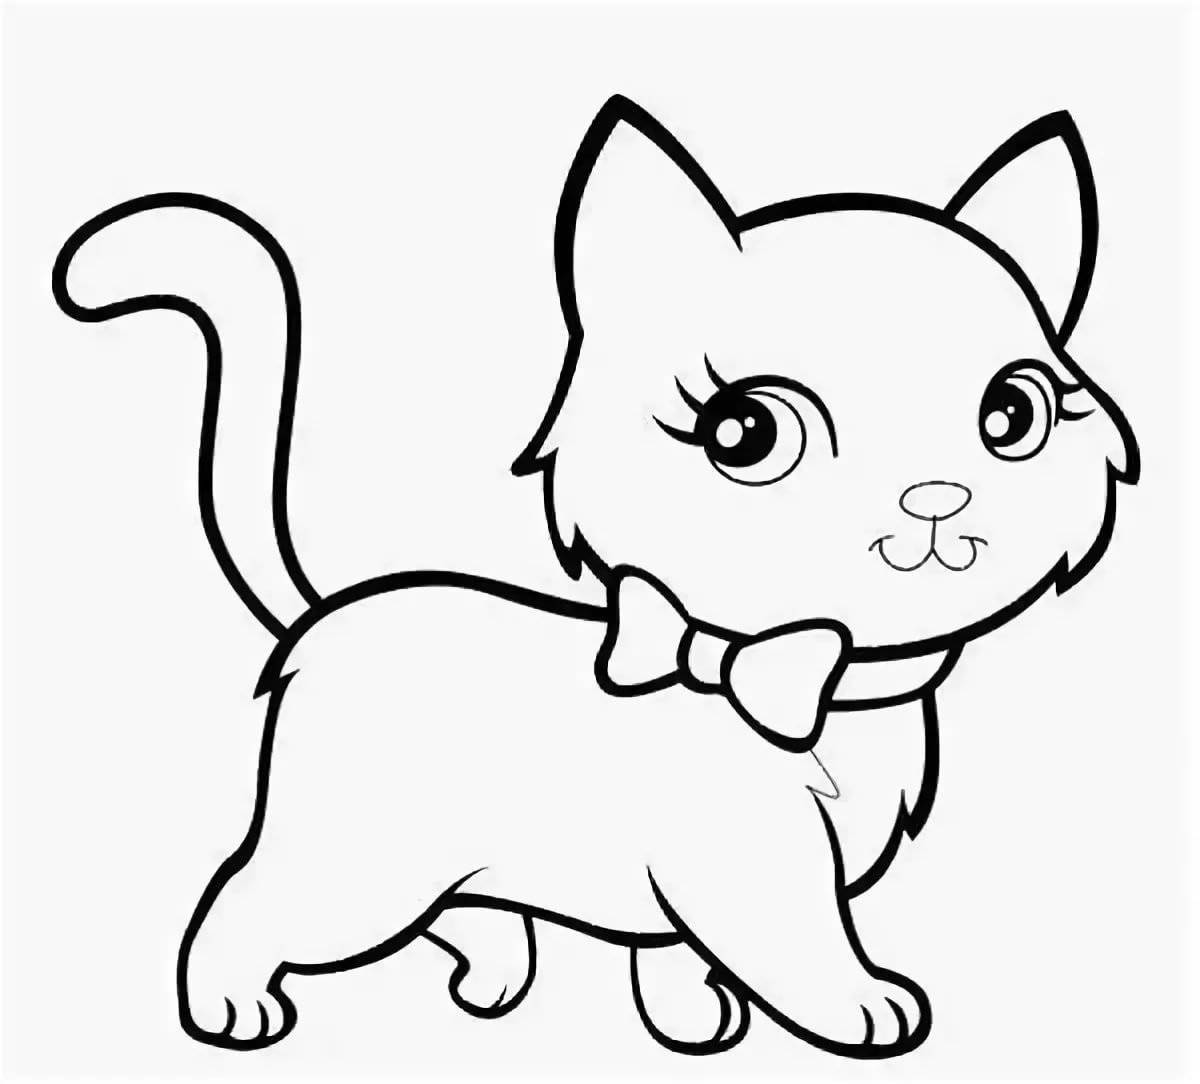 Sweet tail kitten coloring page for kids